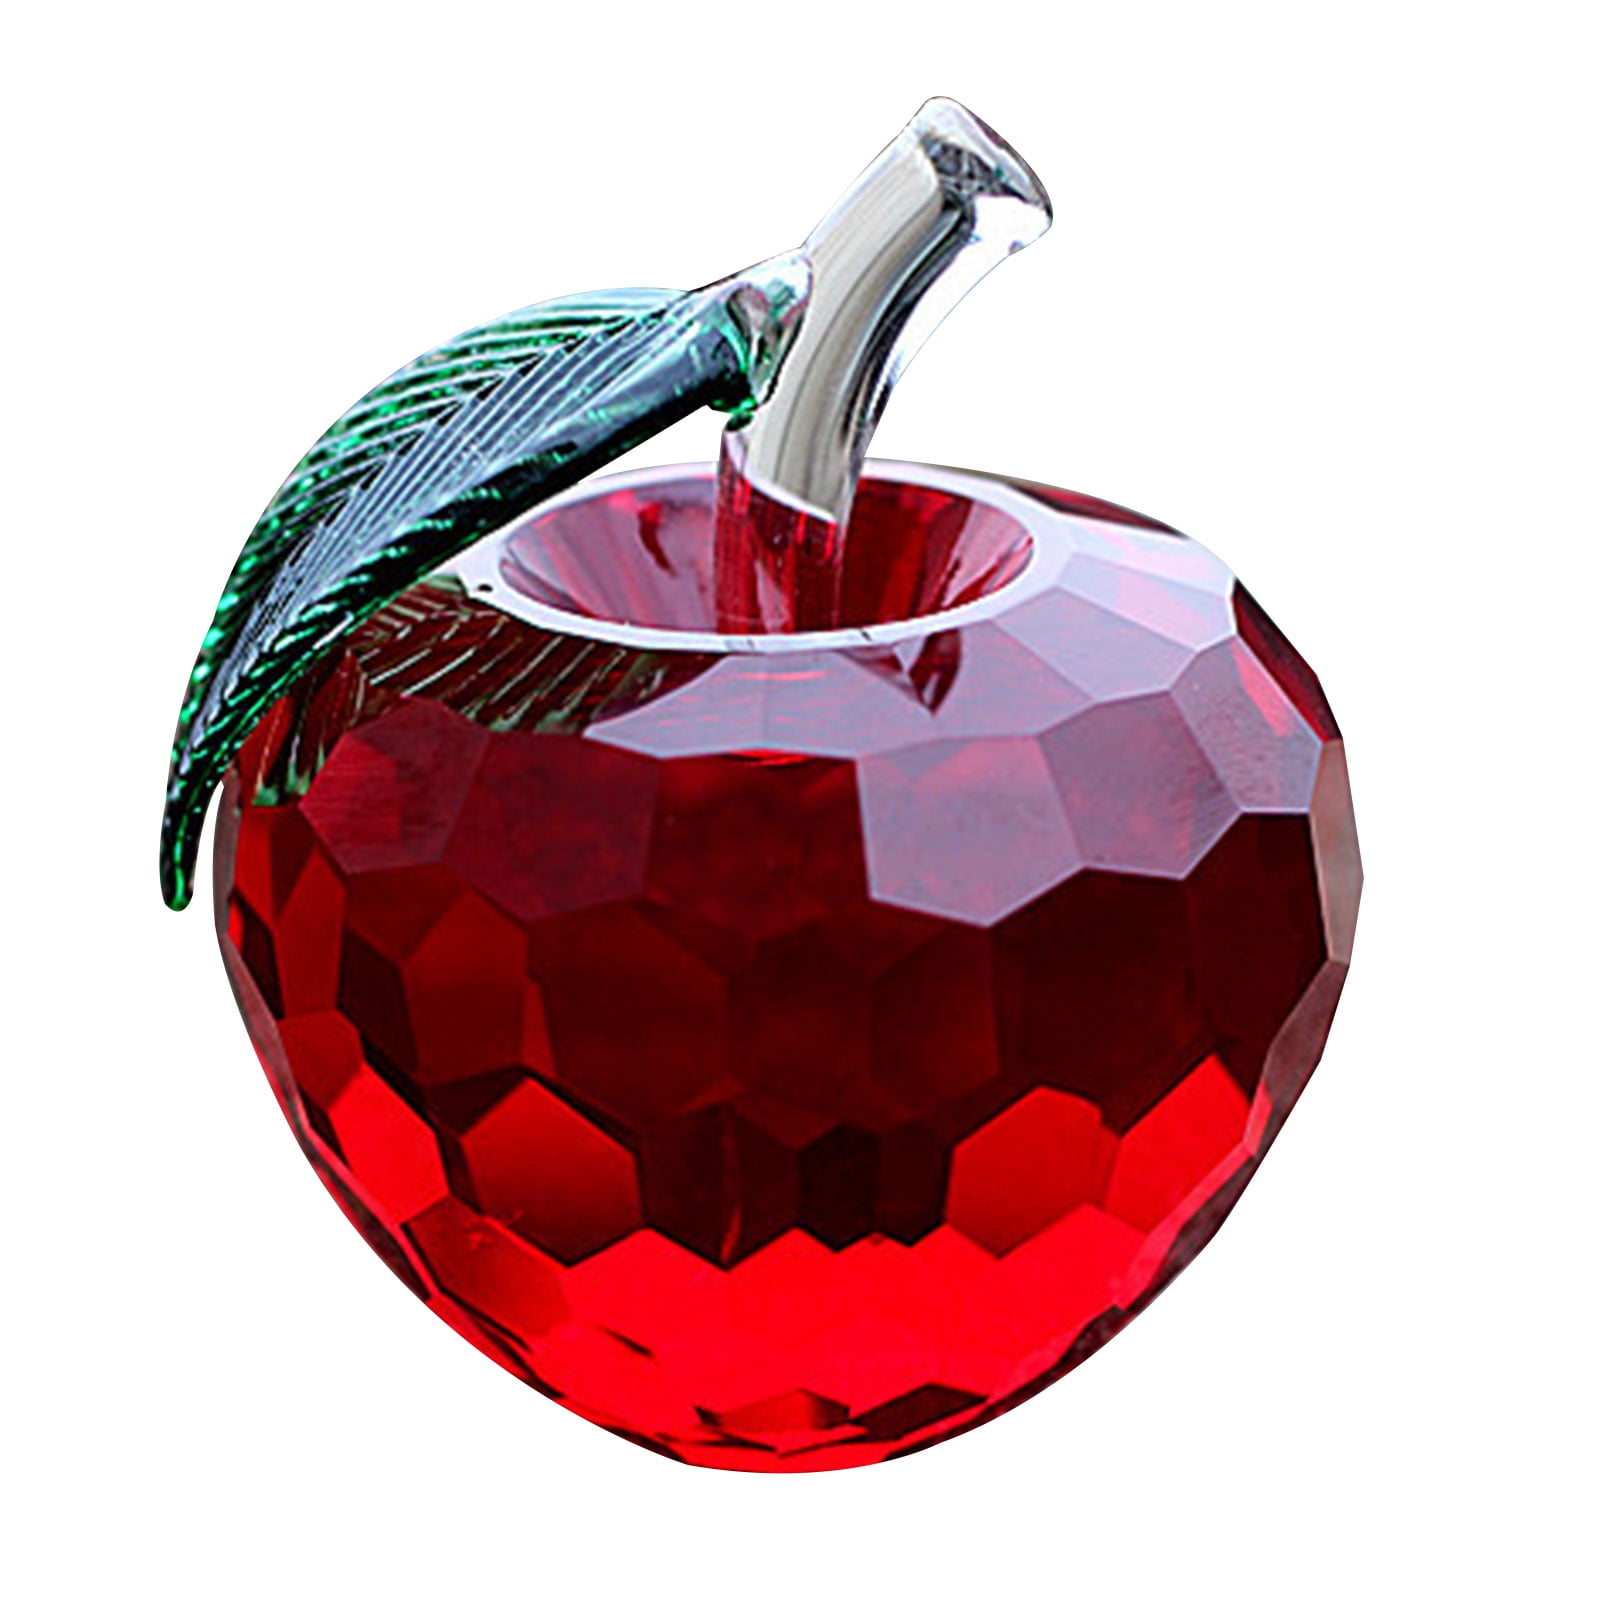 Clear Crystal Apple Paperweight Desktop Gift NEW  in Gift Box 